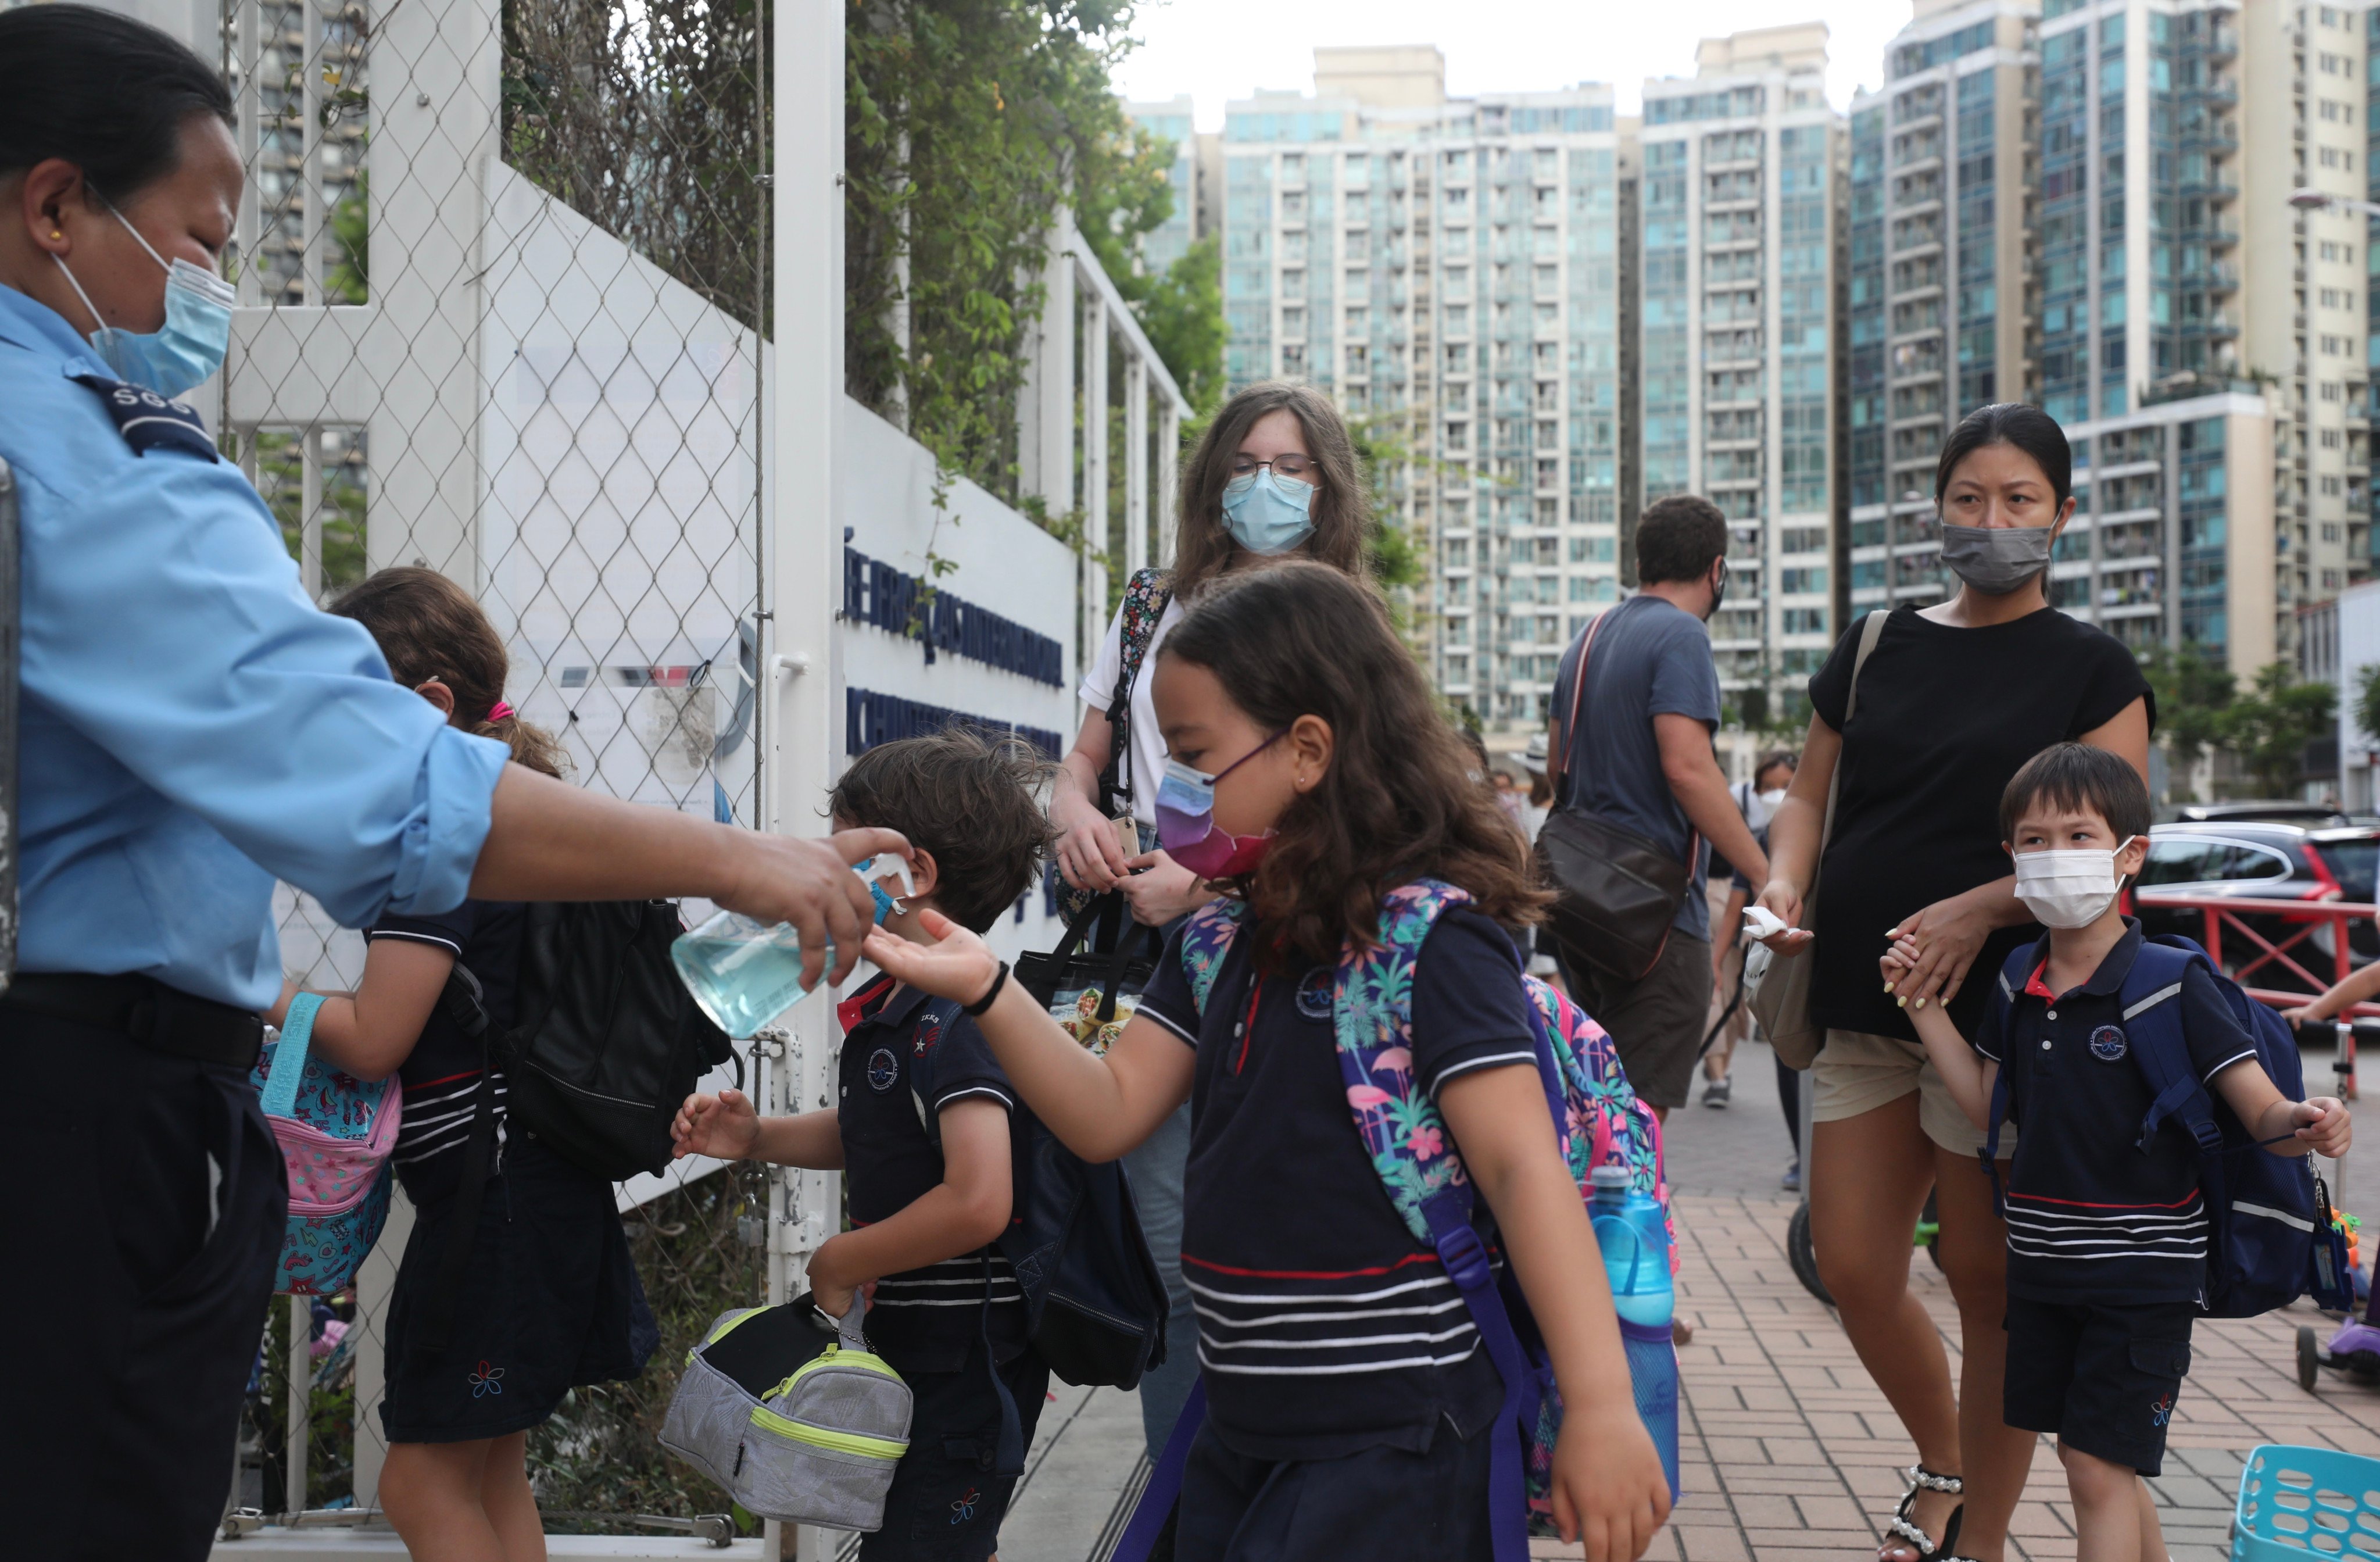 French International School students return to the campus after months of at-home schooling which, although challenging, also brought some gains too. Photo: Xiaomei Chen